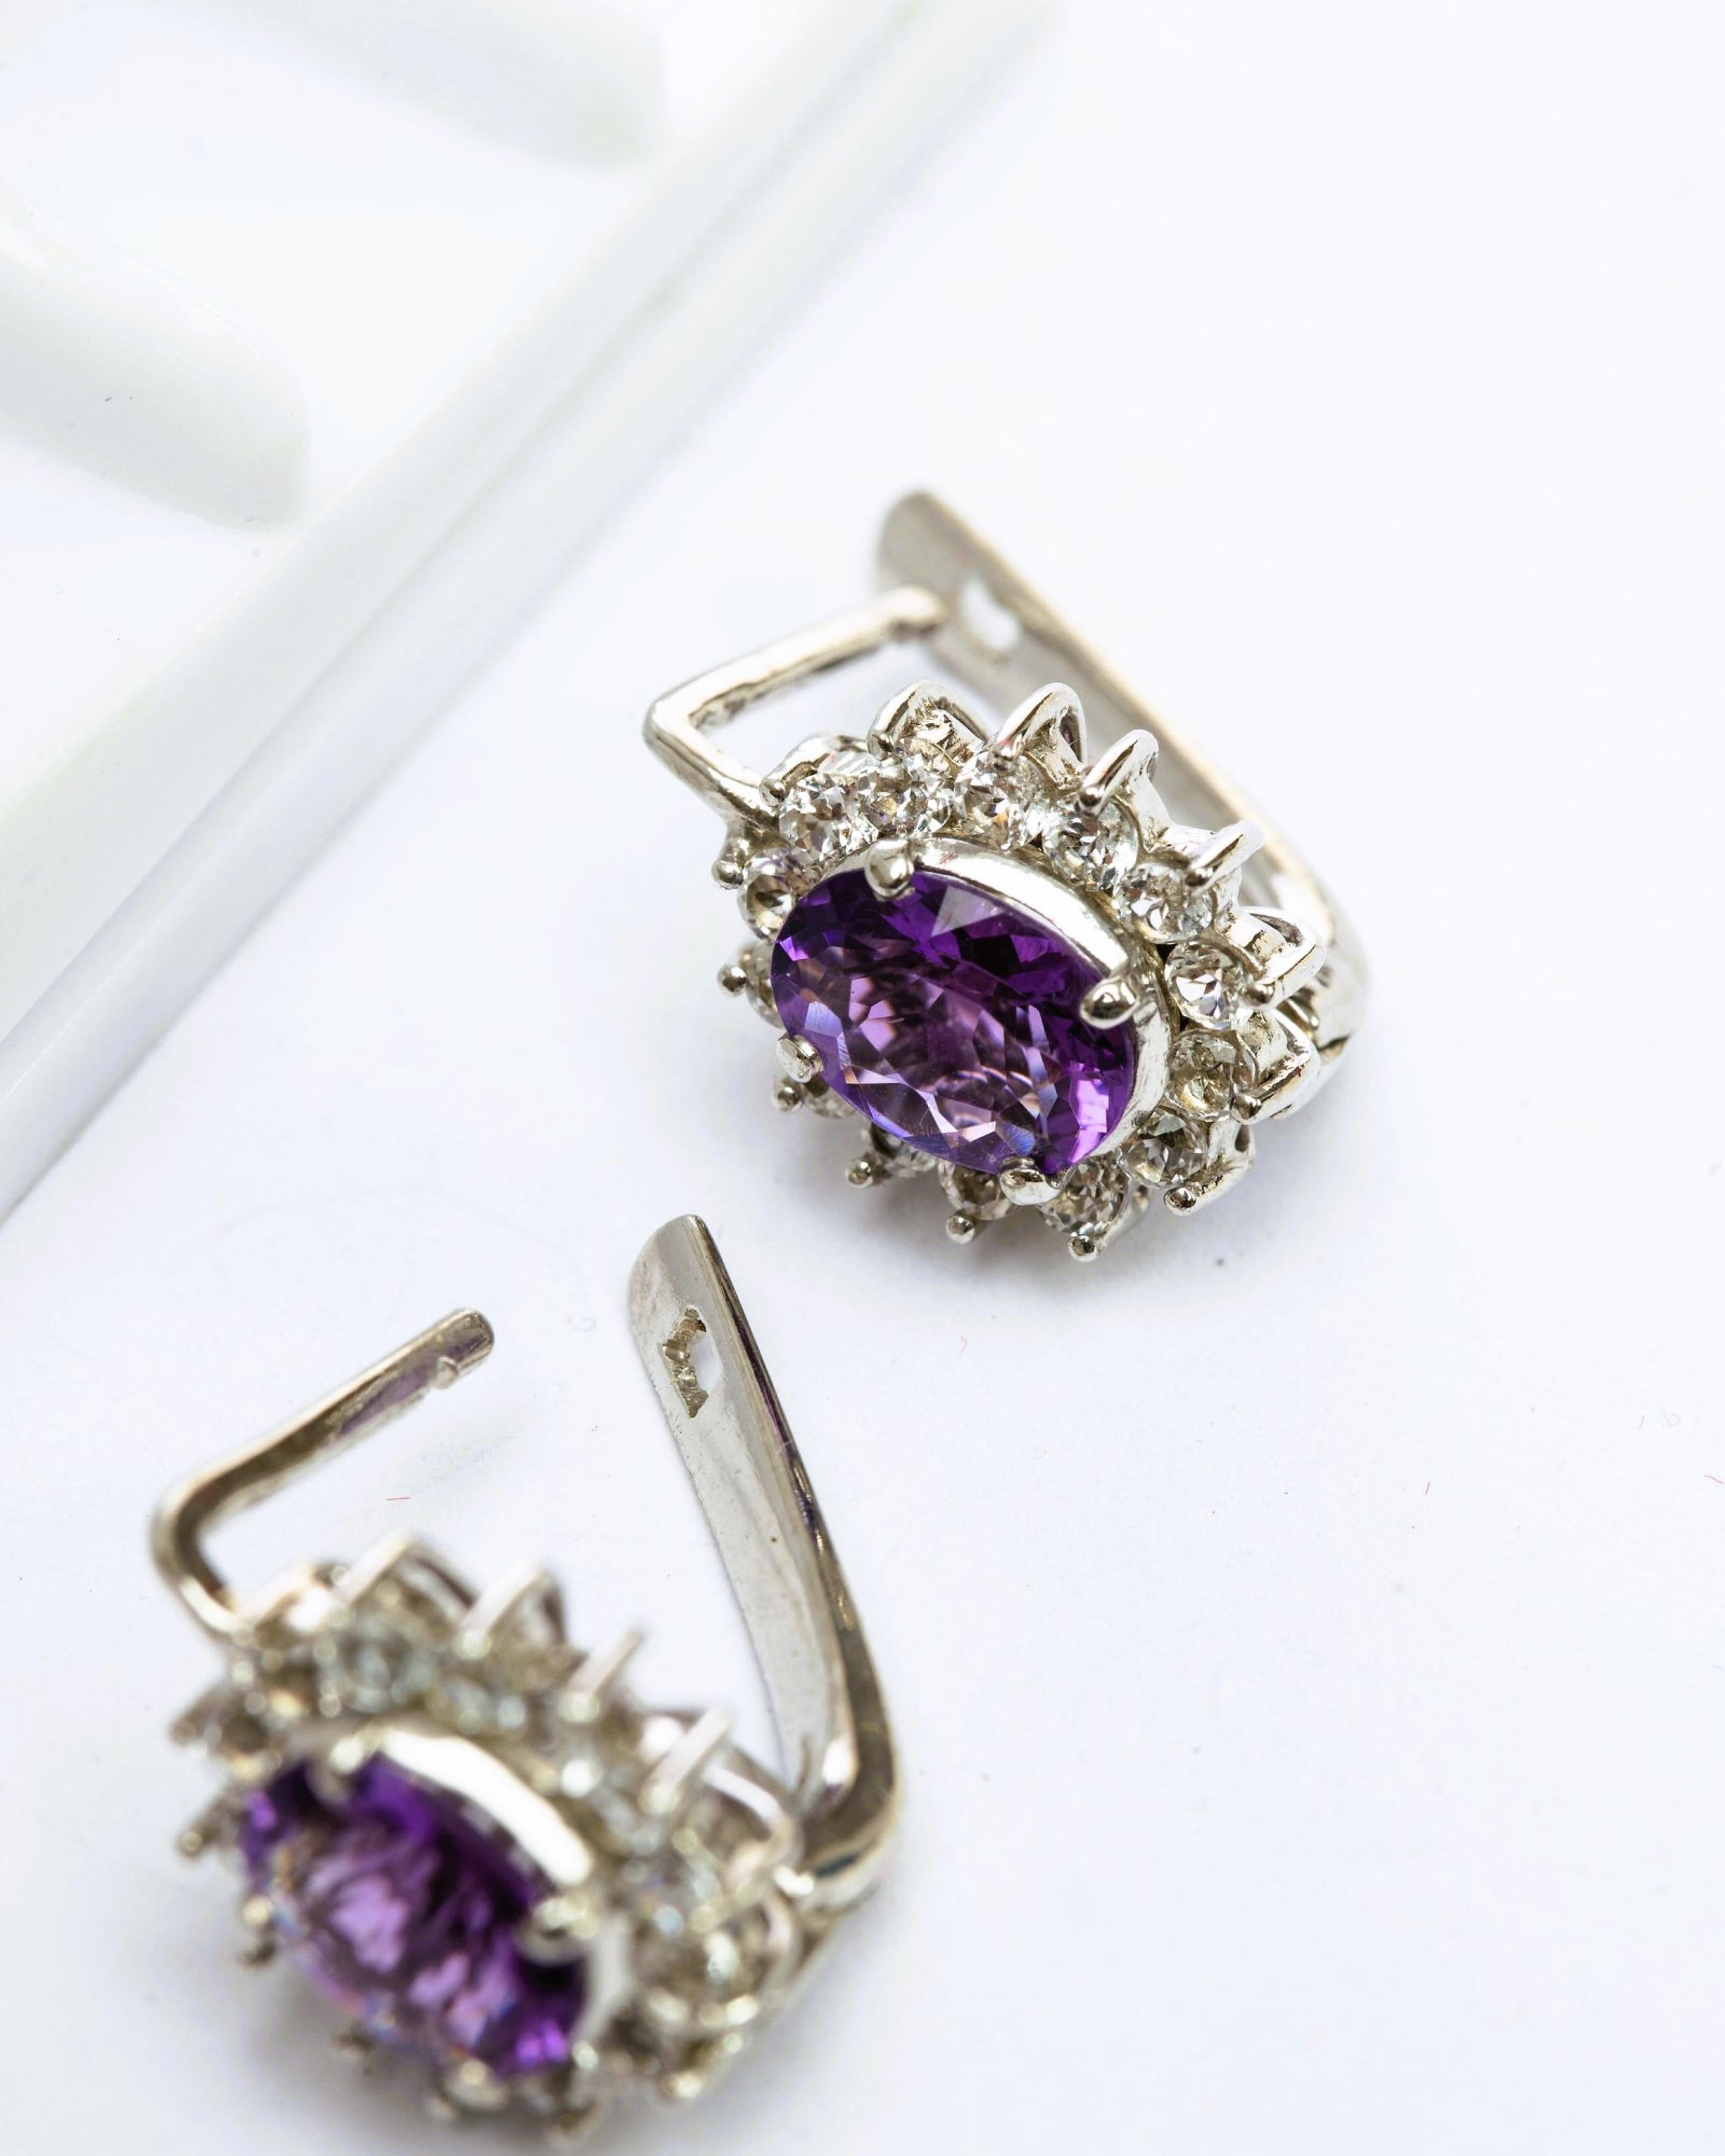 An exquisite 2.5ct Oval Amethyst and Zircon  Plug Earring, a masterpiece that infuses elegance into your every moment.
At the heart of this earring lies a captivating 7.2x6.8mm oval Amethyst gemstone. Known for its enchanting purple hue, the